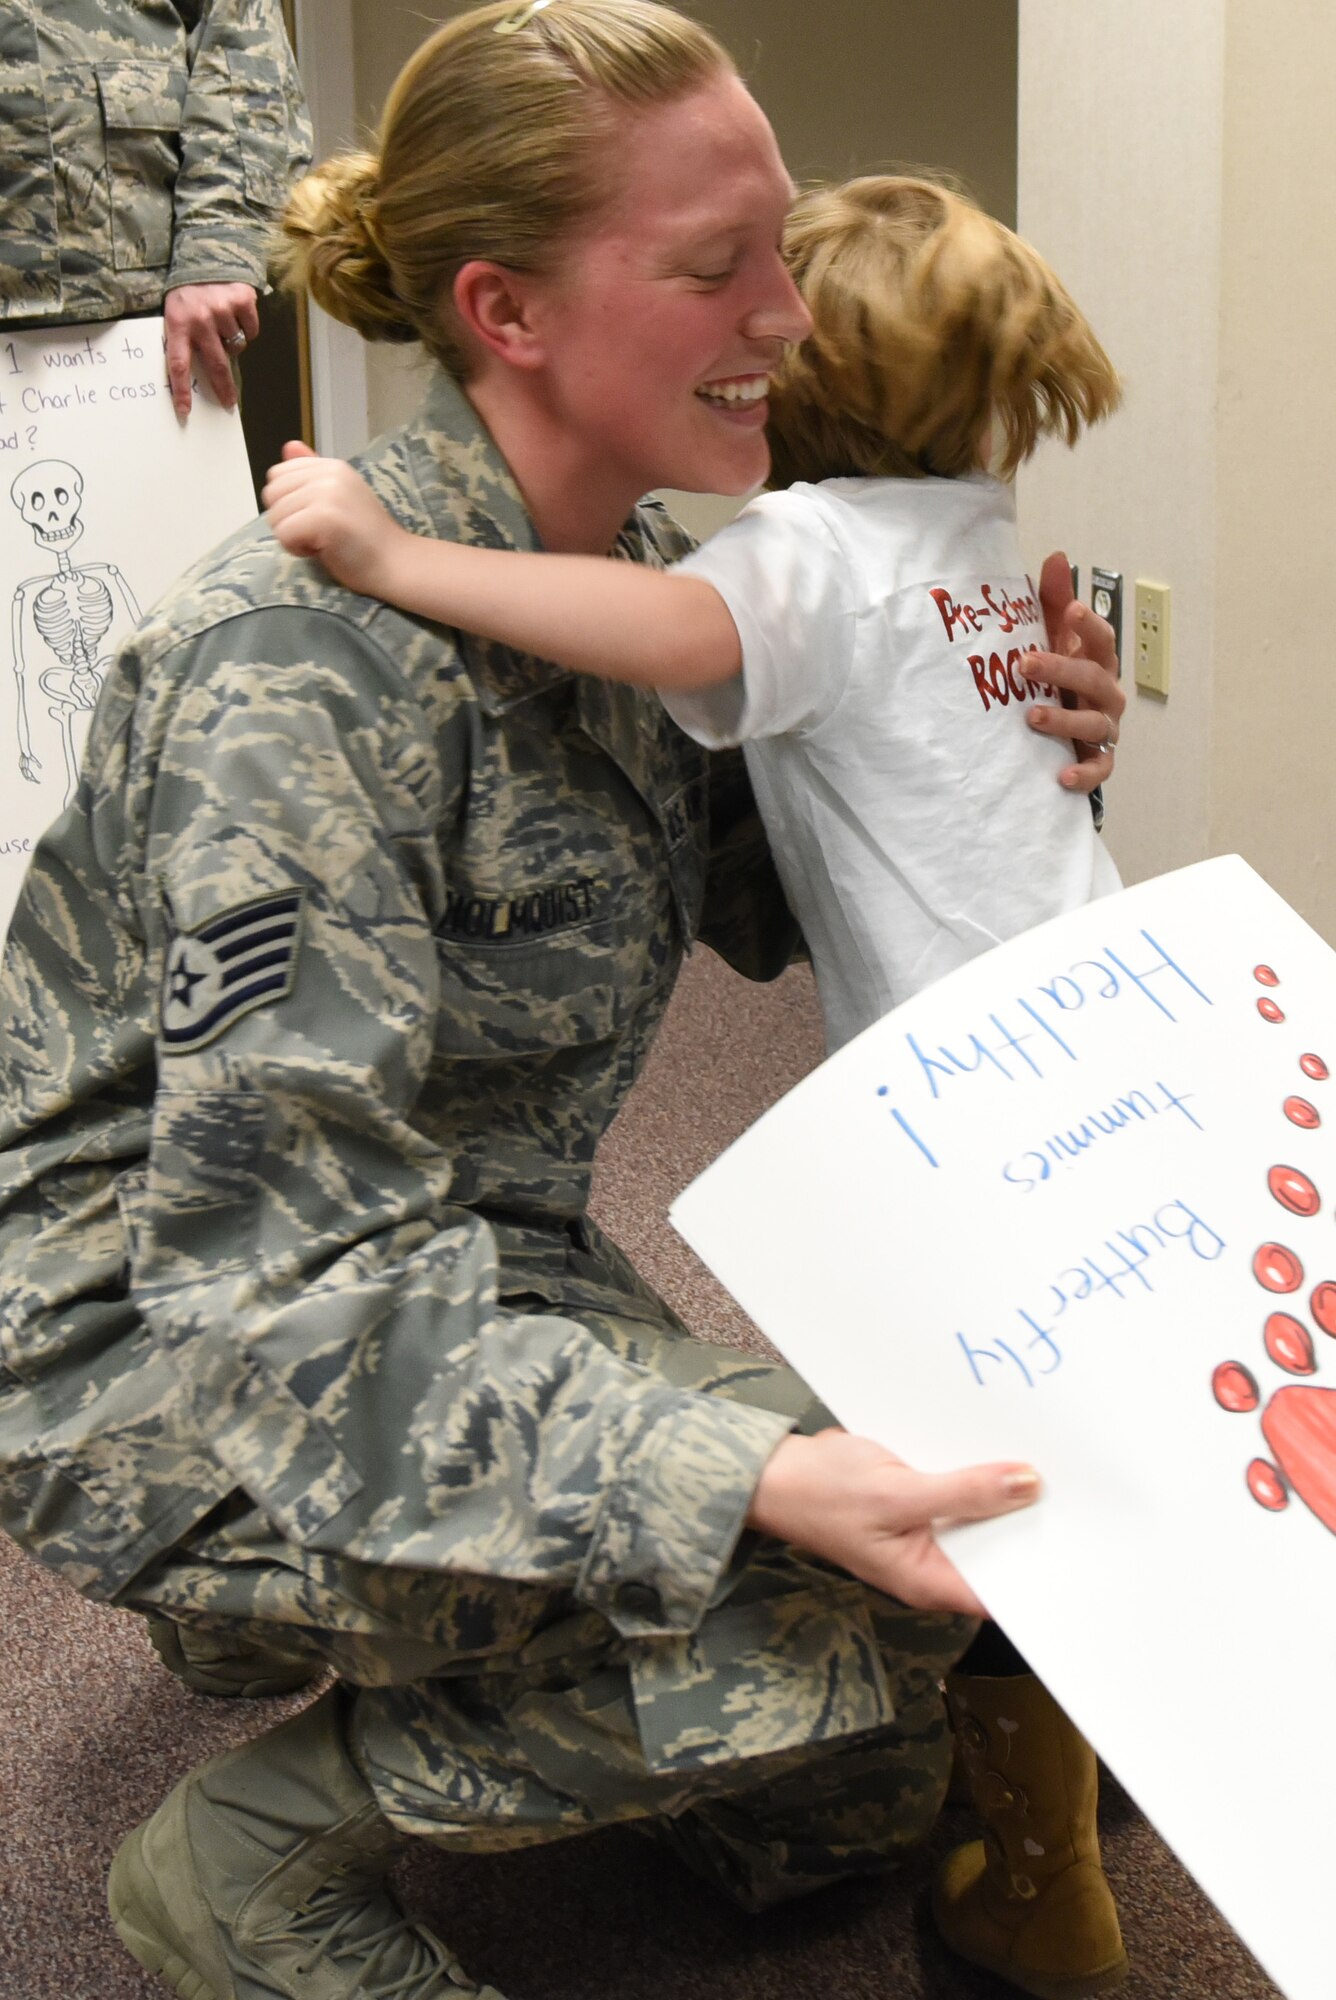 Staff Sgt. Erin Holmquist, 4th Medical Operations Squadron medical laboratory technician, hugs a preschooler from the 4th Force Support Squadron Child Development Center, March 21, 2017, at Seymour Johnson Air Force Base, North Carolina. The children presented the laboratory staff with a thank you card during a field trip visit. (U.S. Air Force photo by Airman 1st Class Victoria Boyton)